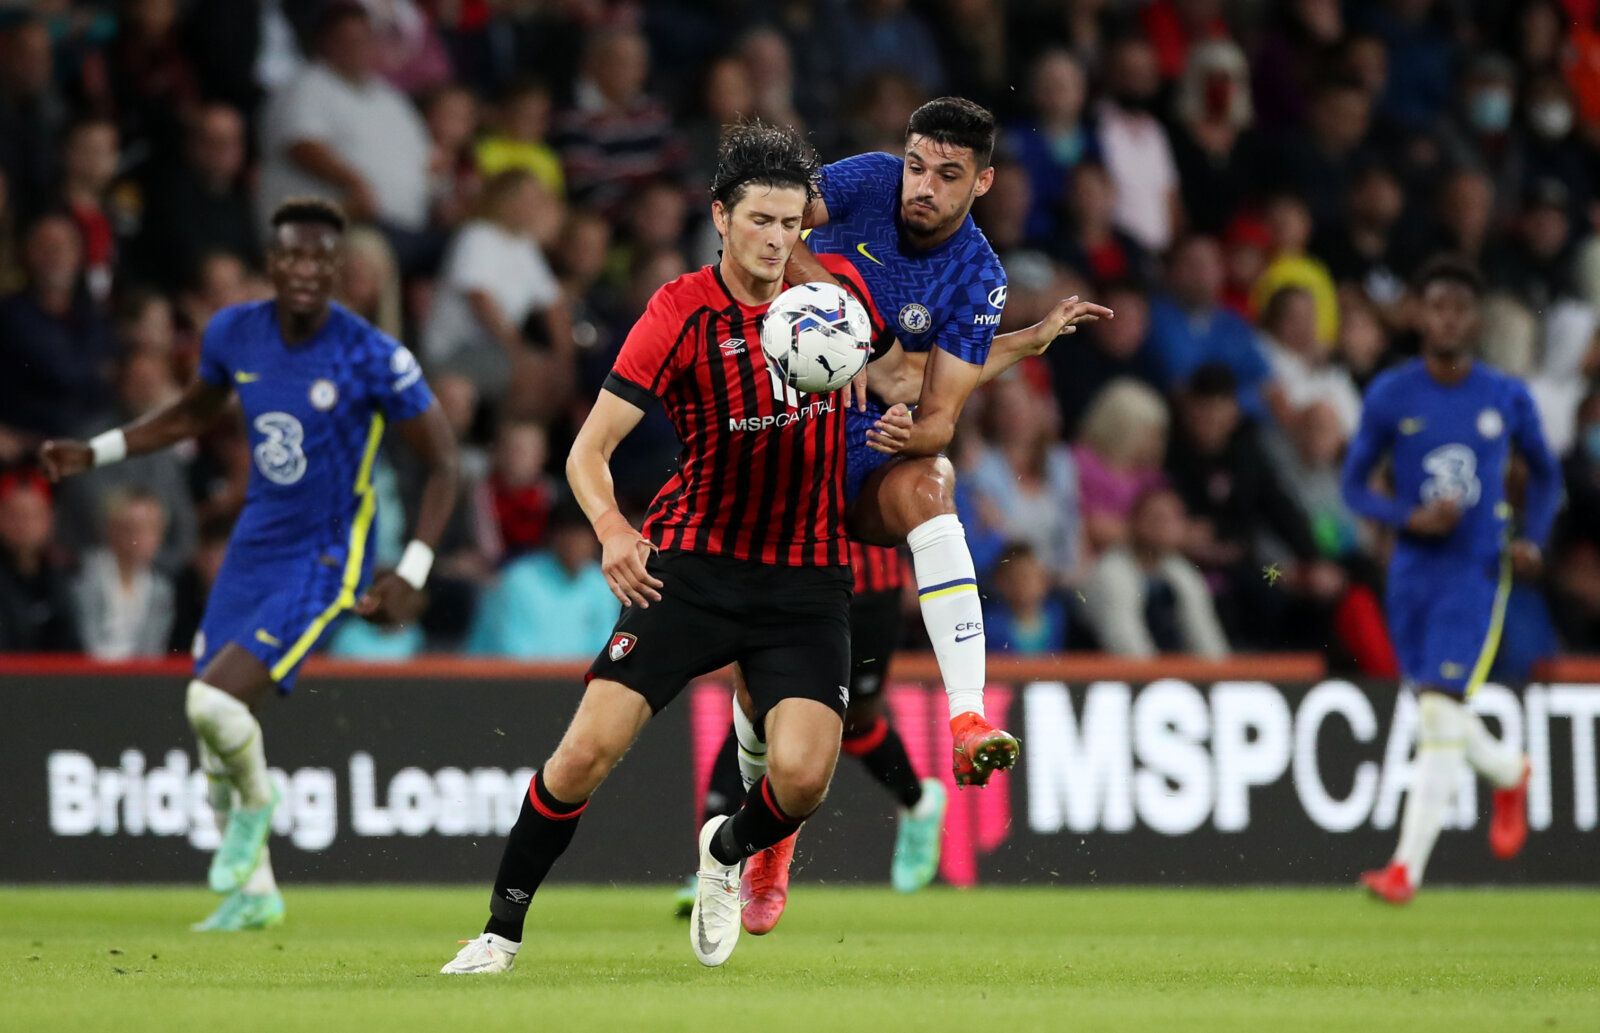 Soccer Football - Pre Season Friendly - AFC Bournemouth v Chelsea - Vitality Stadium, Bournemouth, Britain - July 27, 2021 Chelsea's Armando Broja in action with Bournemouth's Zeno Ibsen Rossi Action Images via Reuters/Peter Cziborra